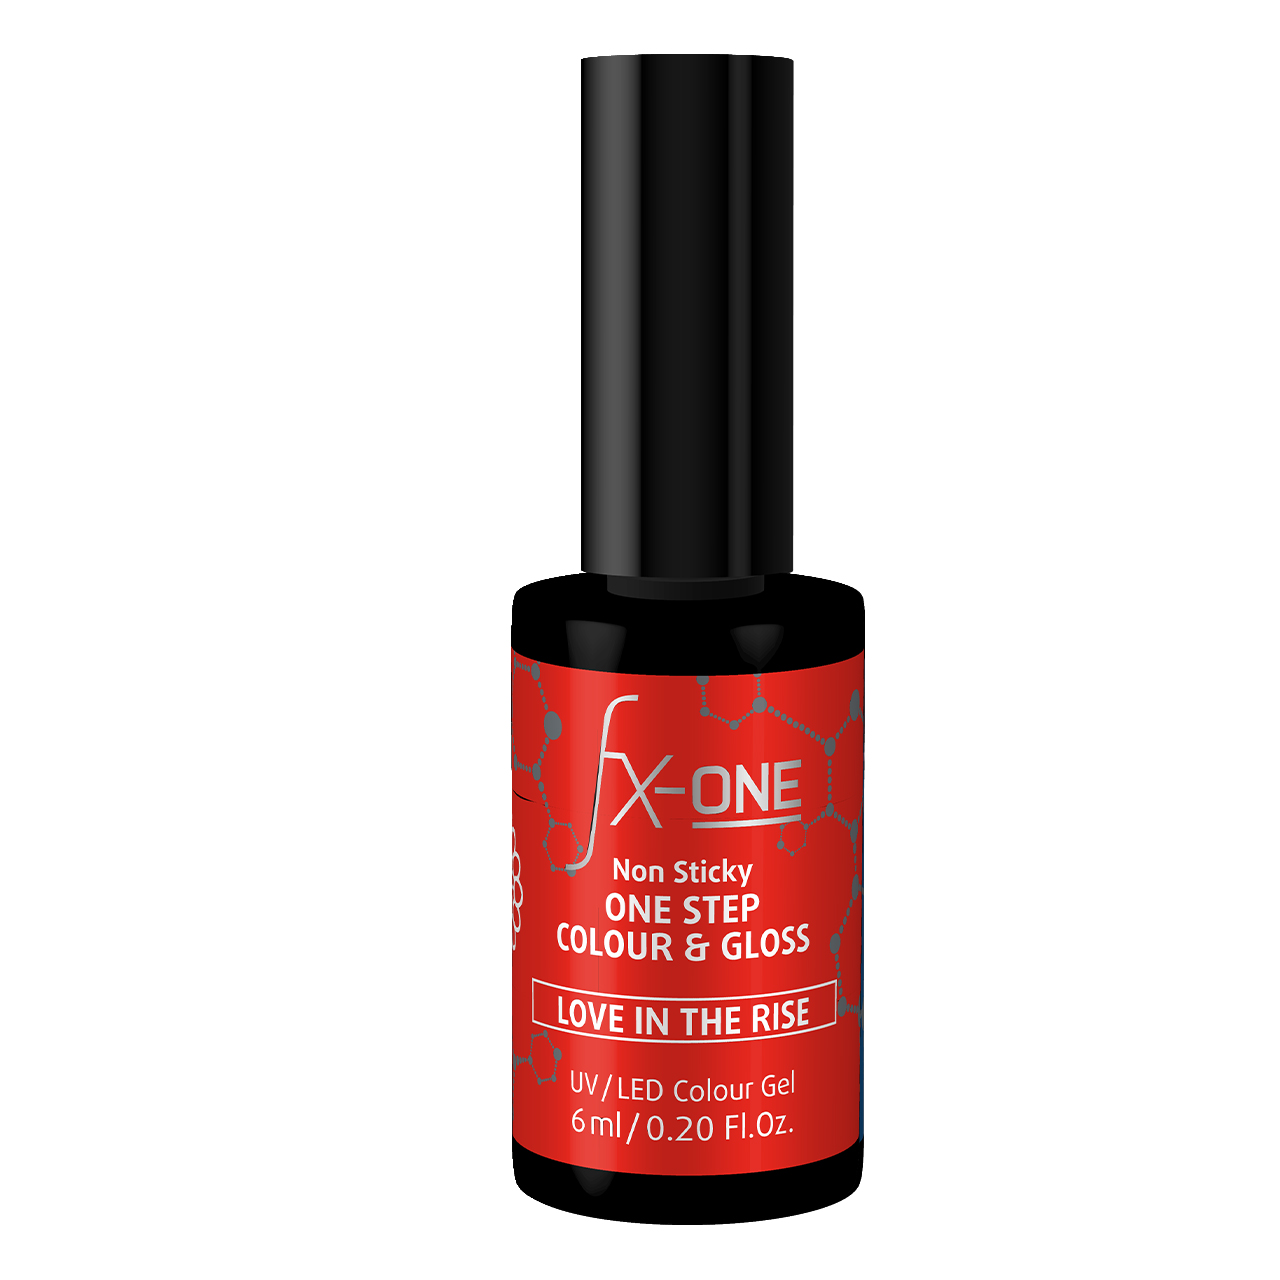 FX-ONE Colour & Gloss Love In The Rise 6 Ml